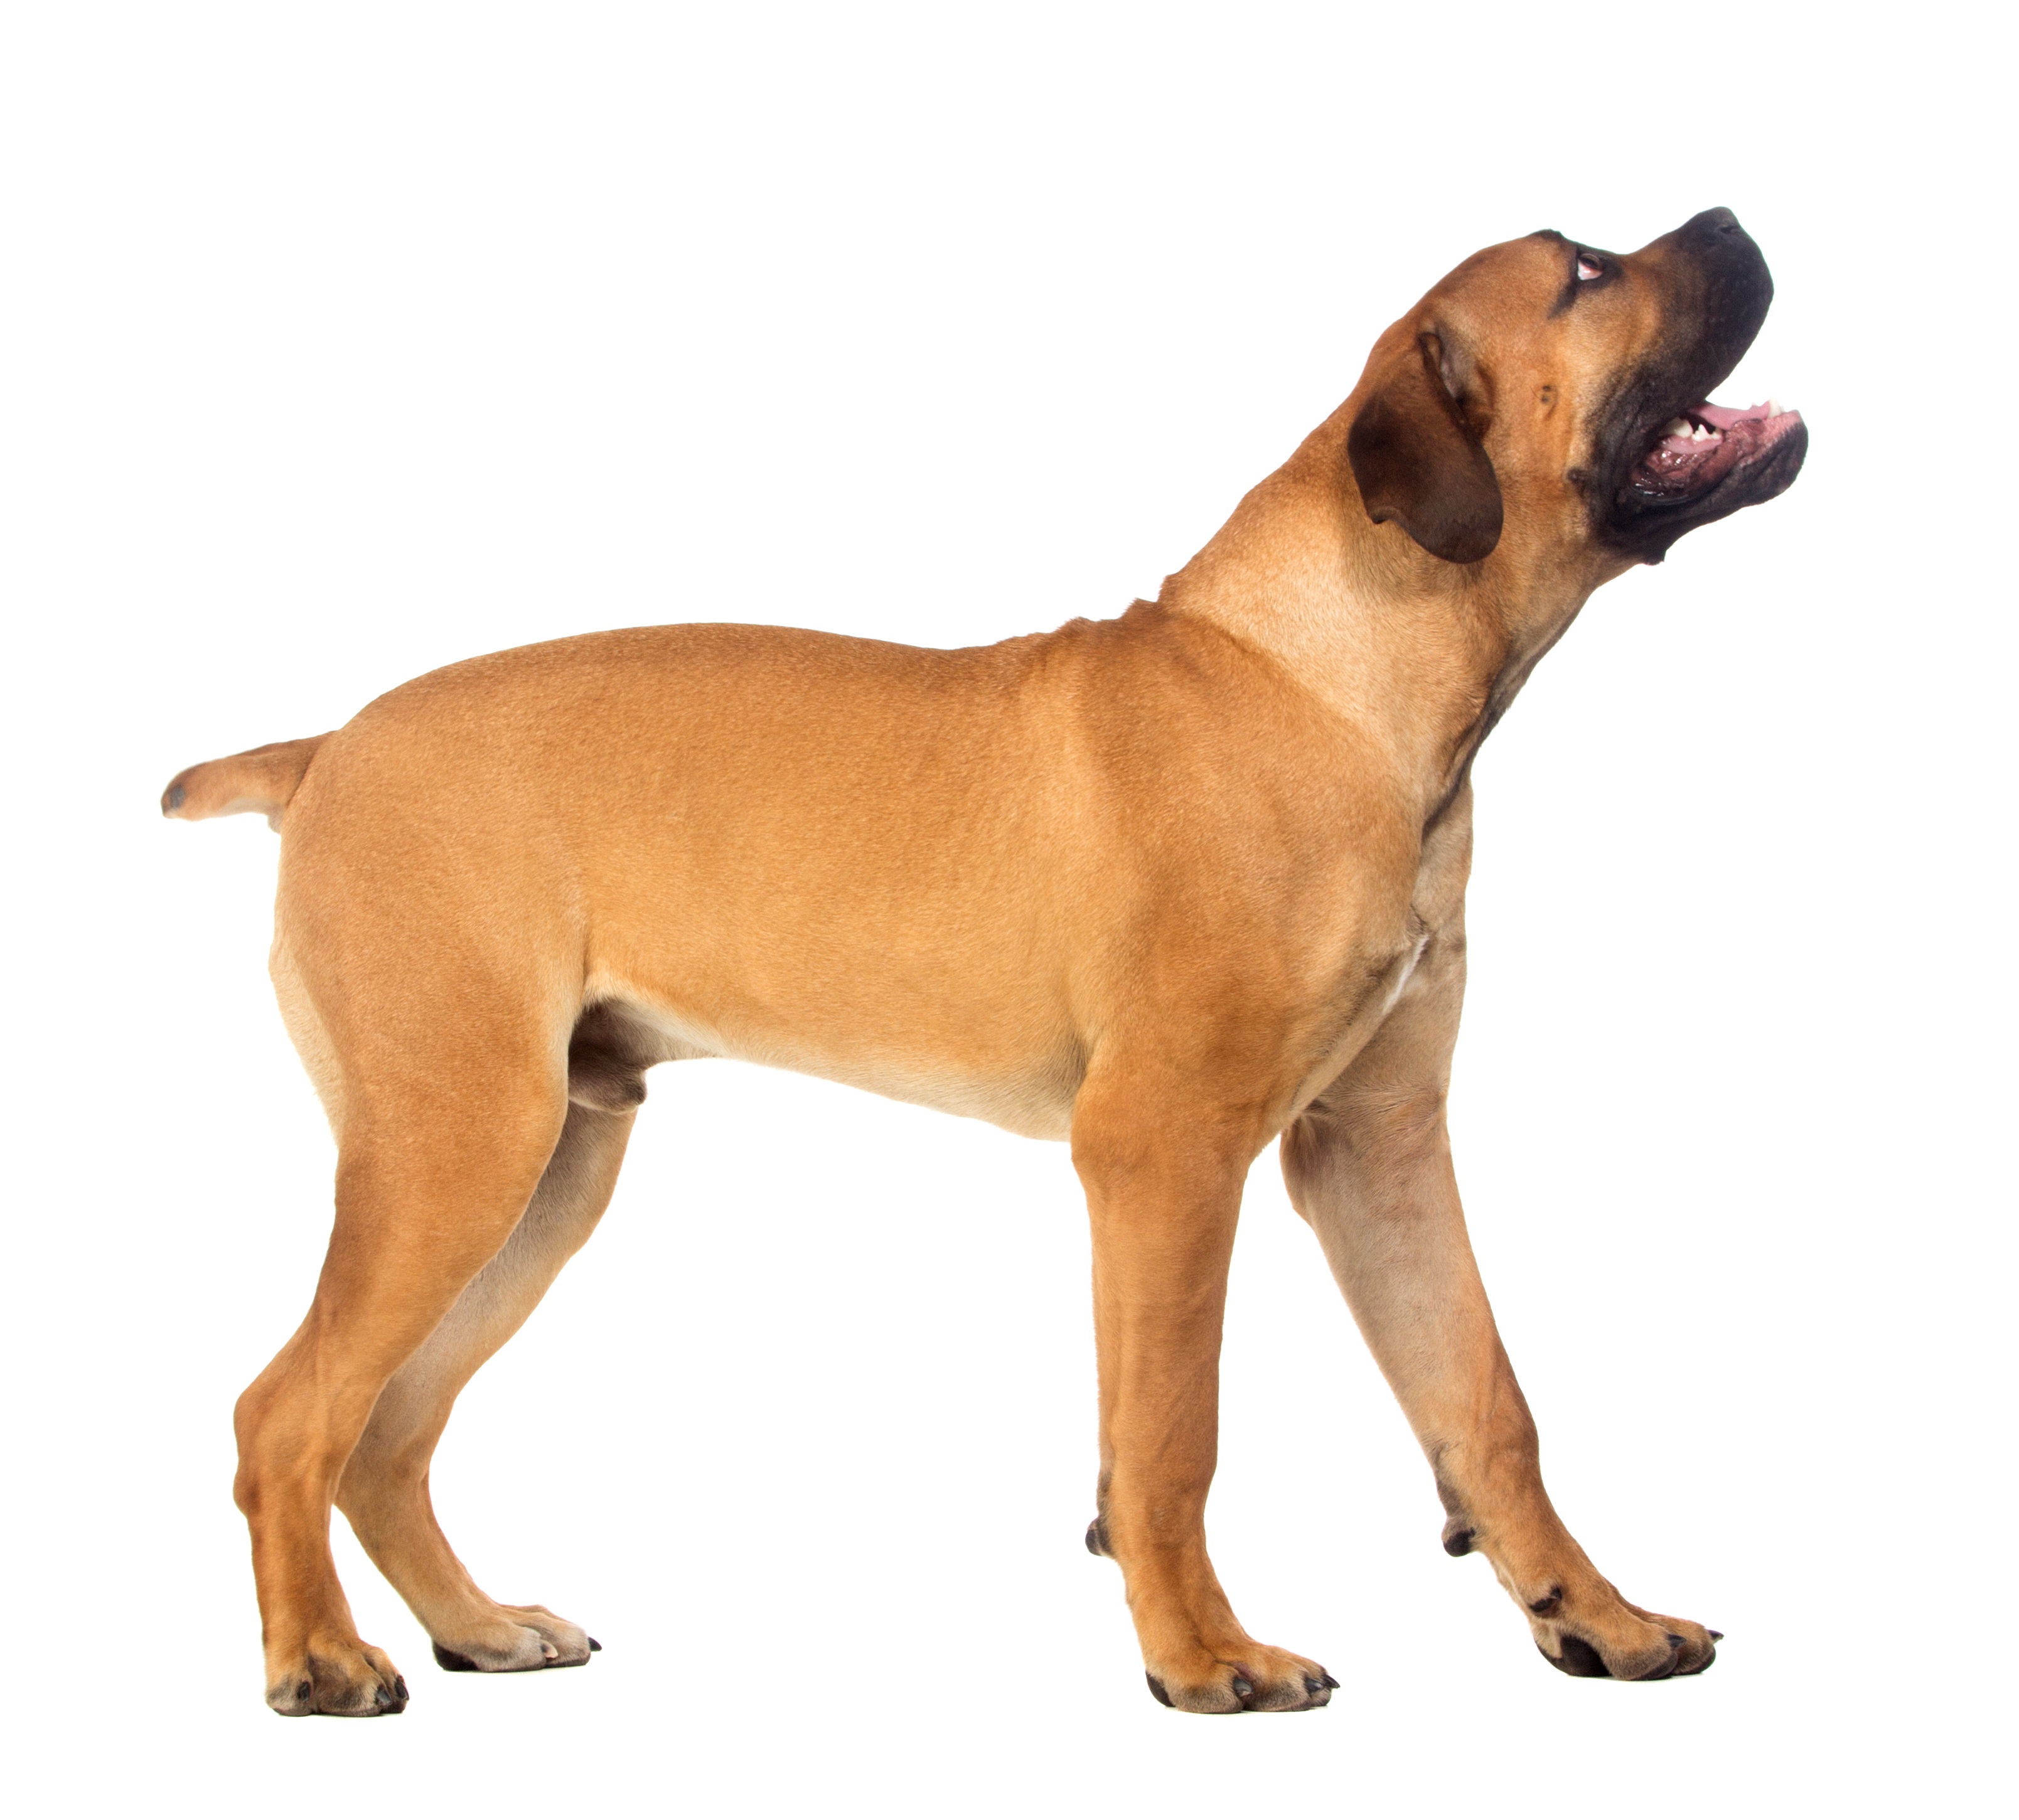 Boerboel Dog Breed Information and Pictures